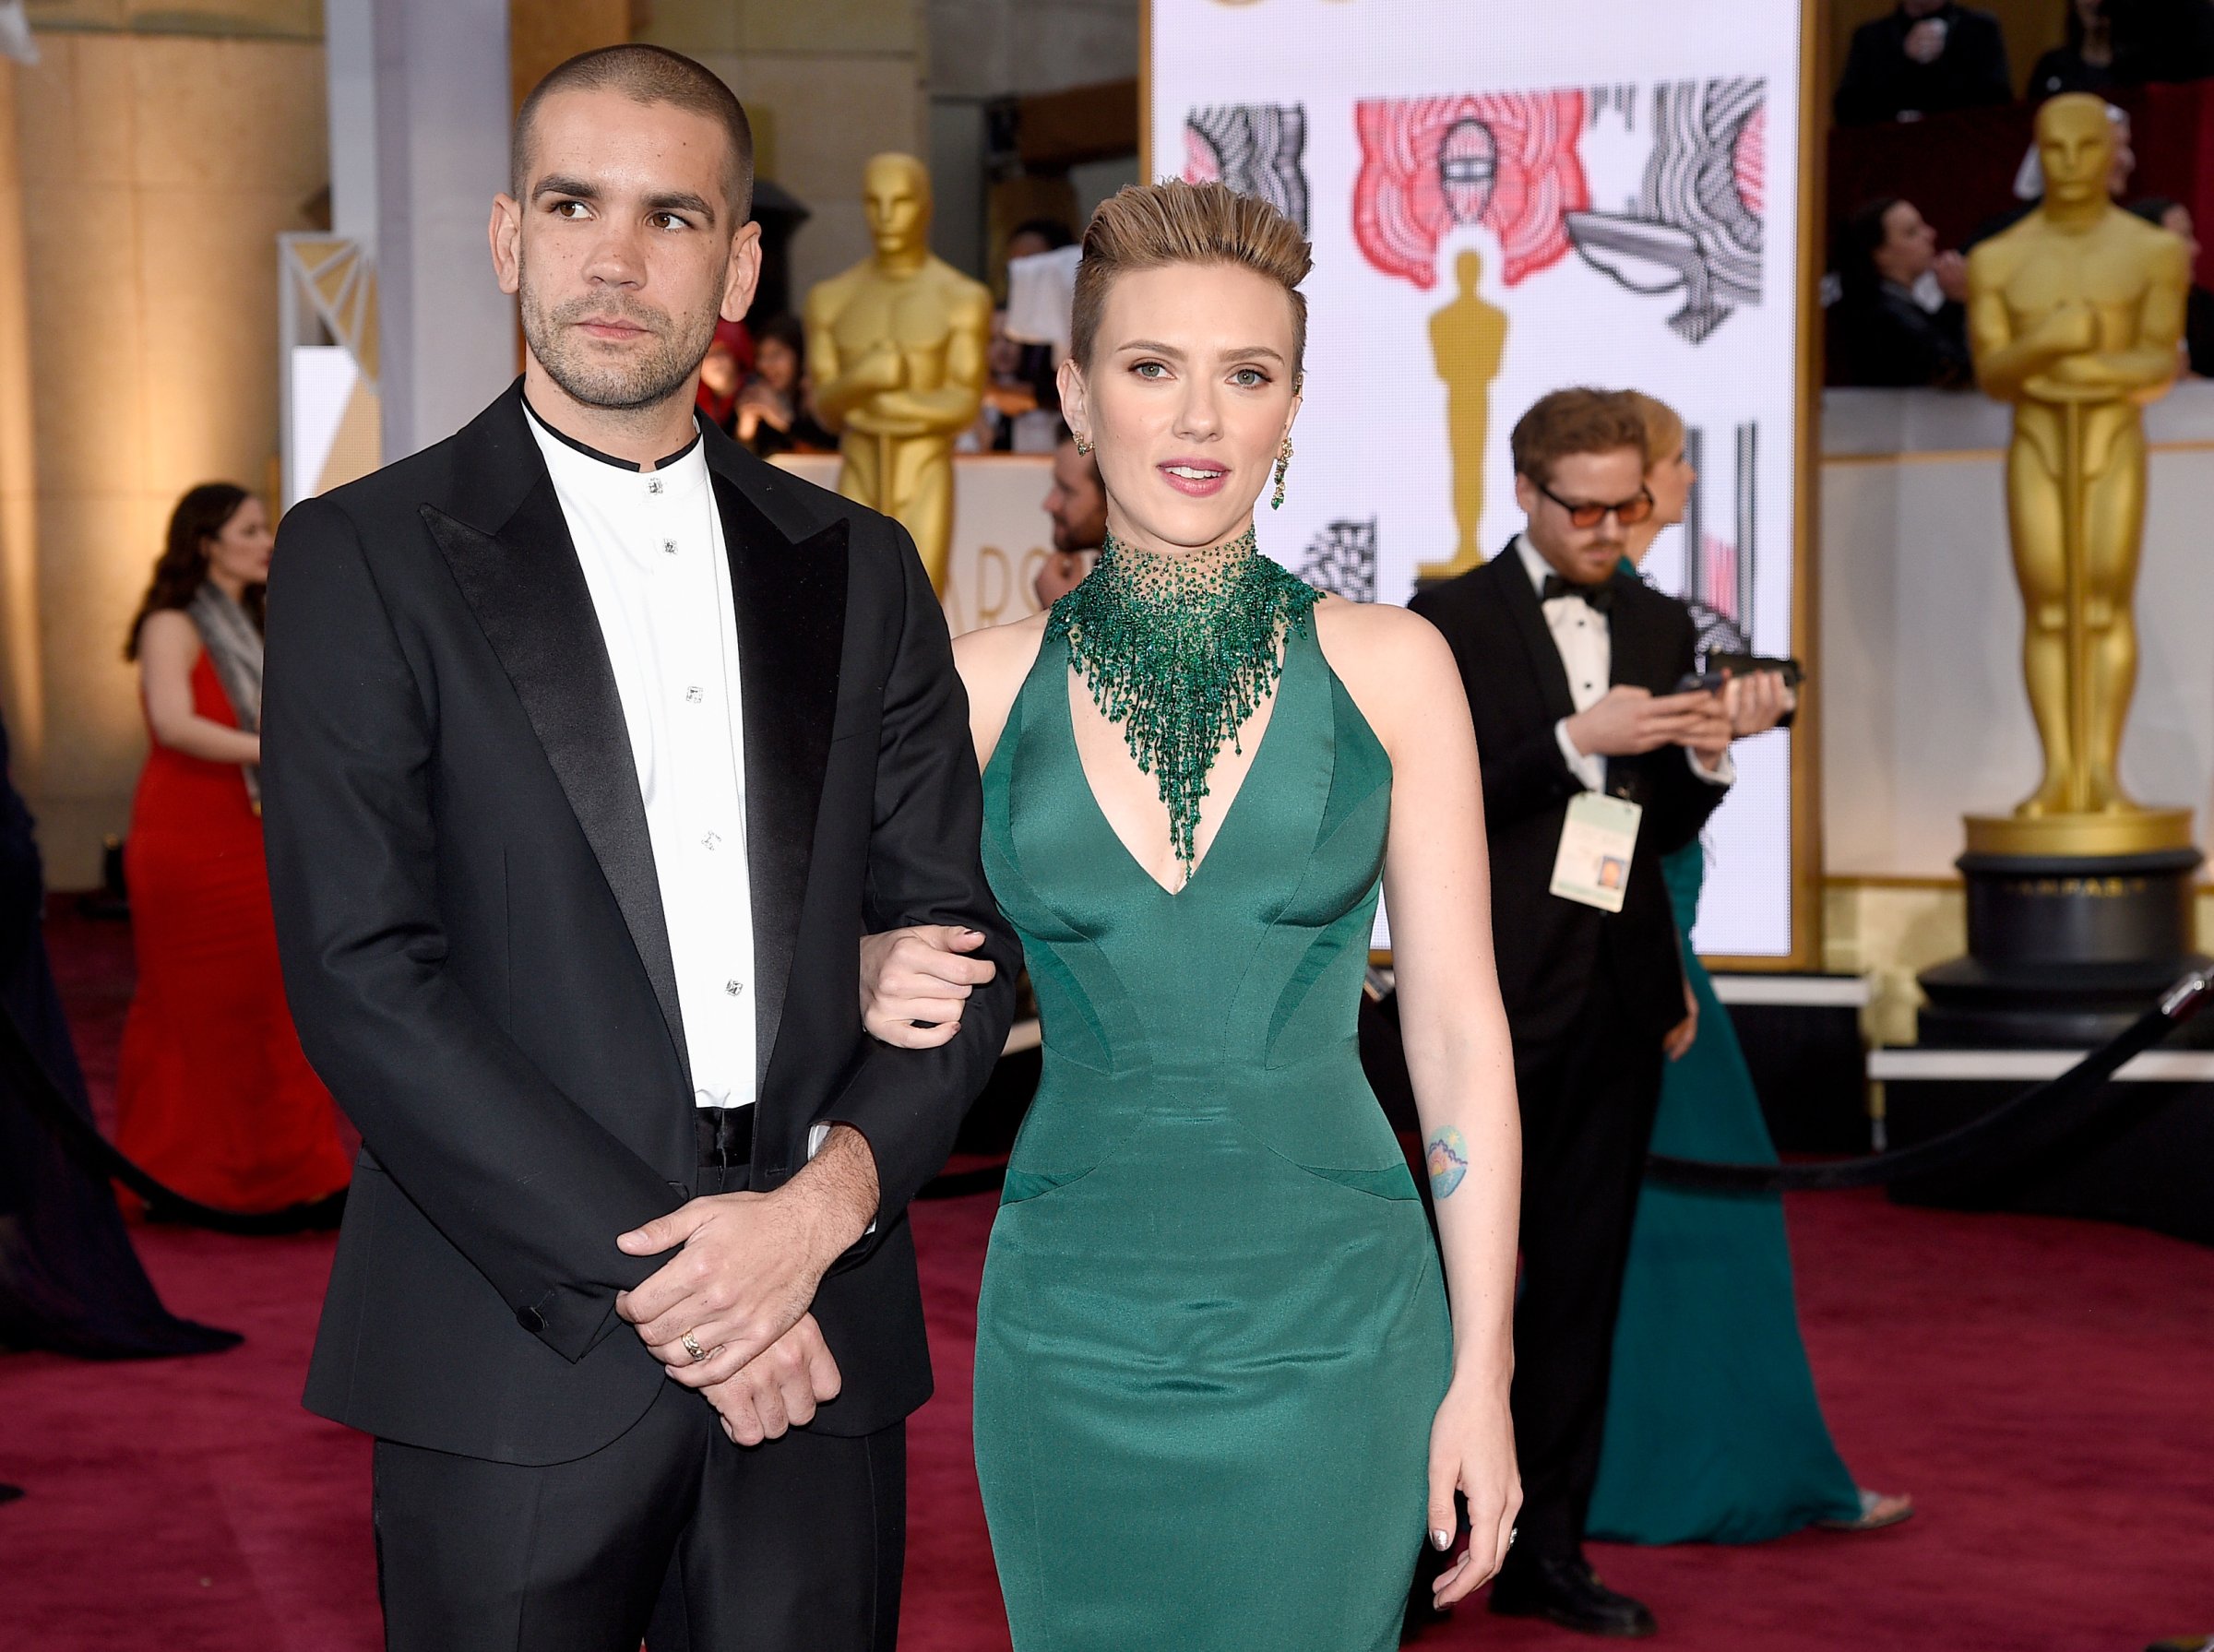 Actress Scarlett Johansson (R) and Romain Dauriac attend the 87th Annual Academy Awards at Hollywood & Highland Center on February 22, 2015 in Hollywood, California.